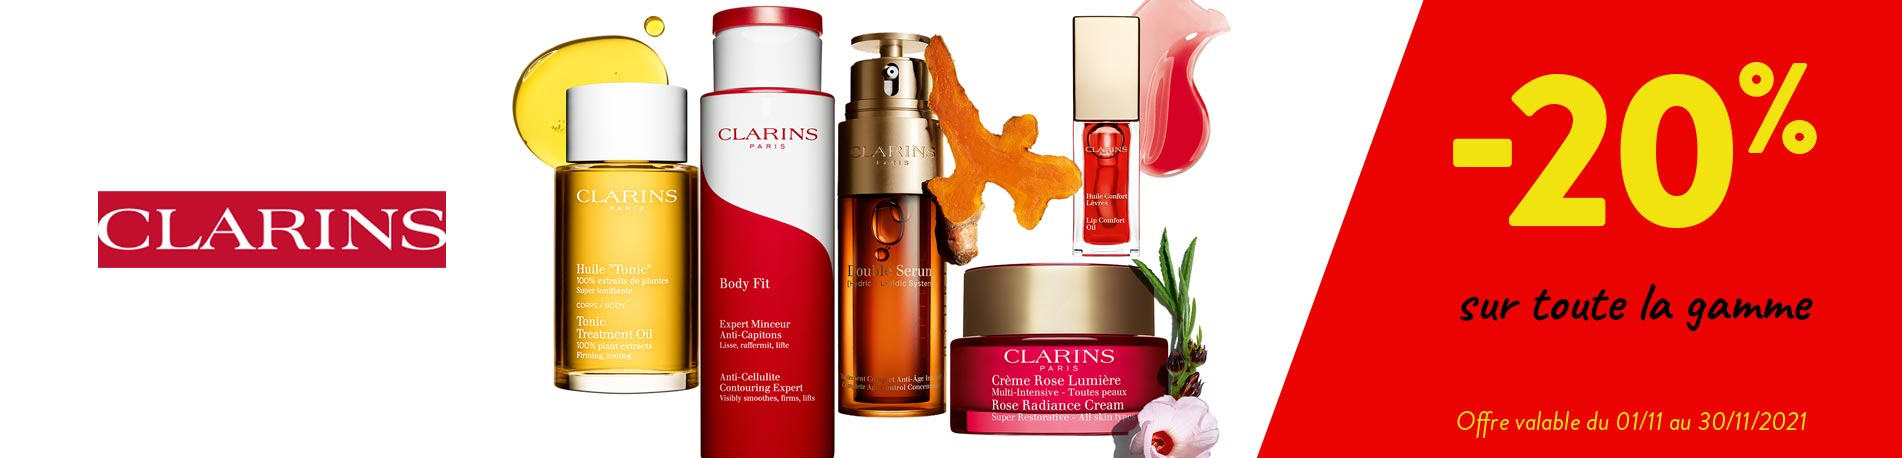 Promotion Clarins